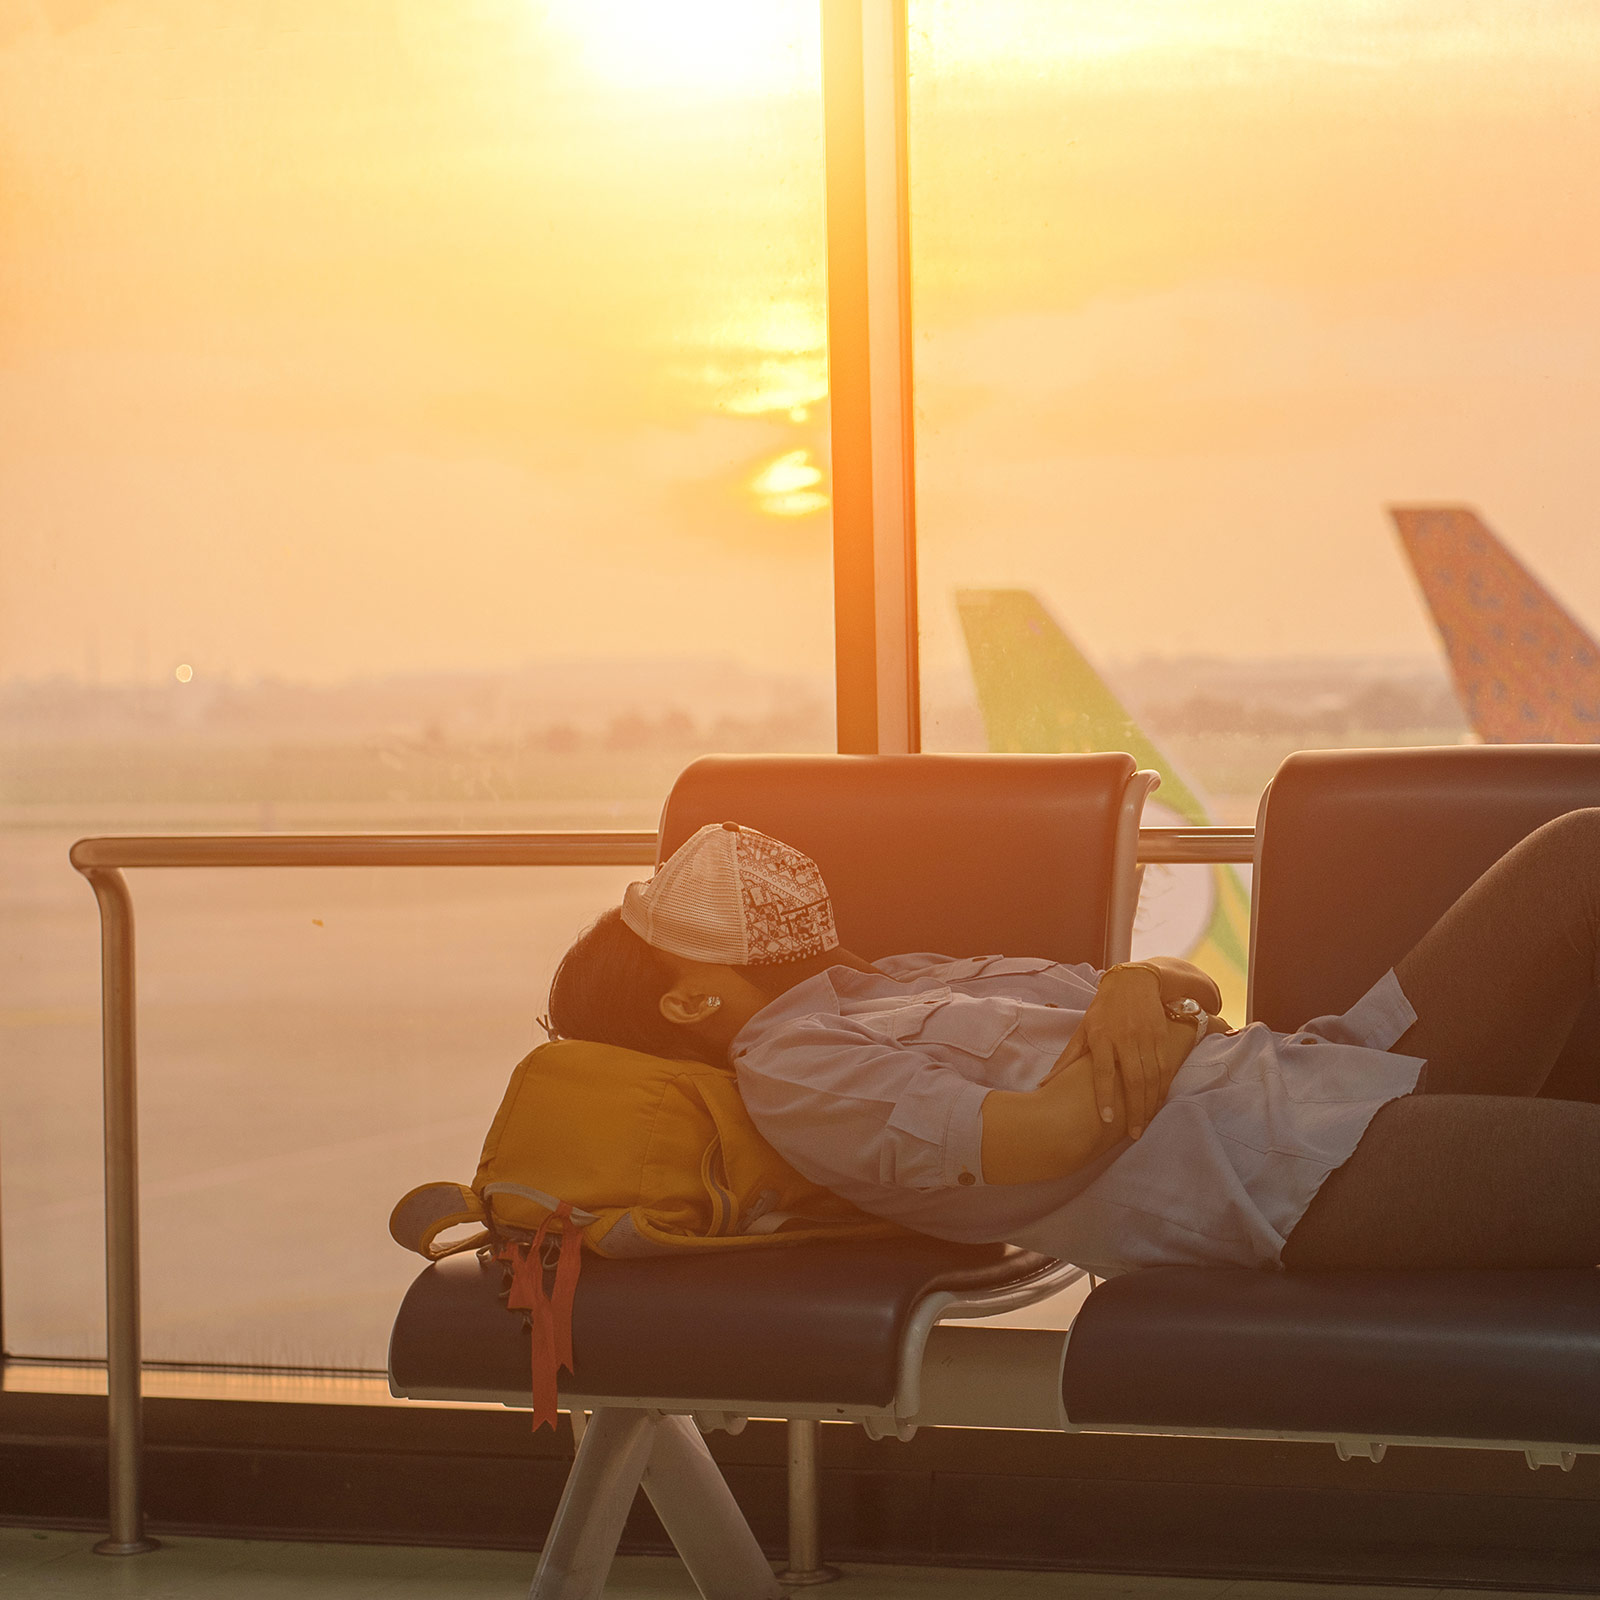 Lady sleeping in airport. How to sleep in airports